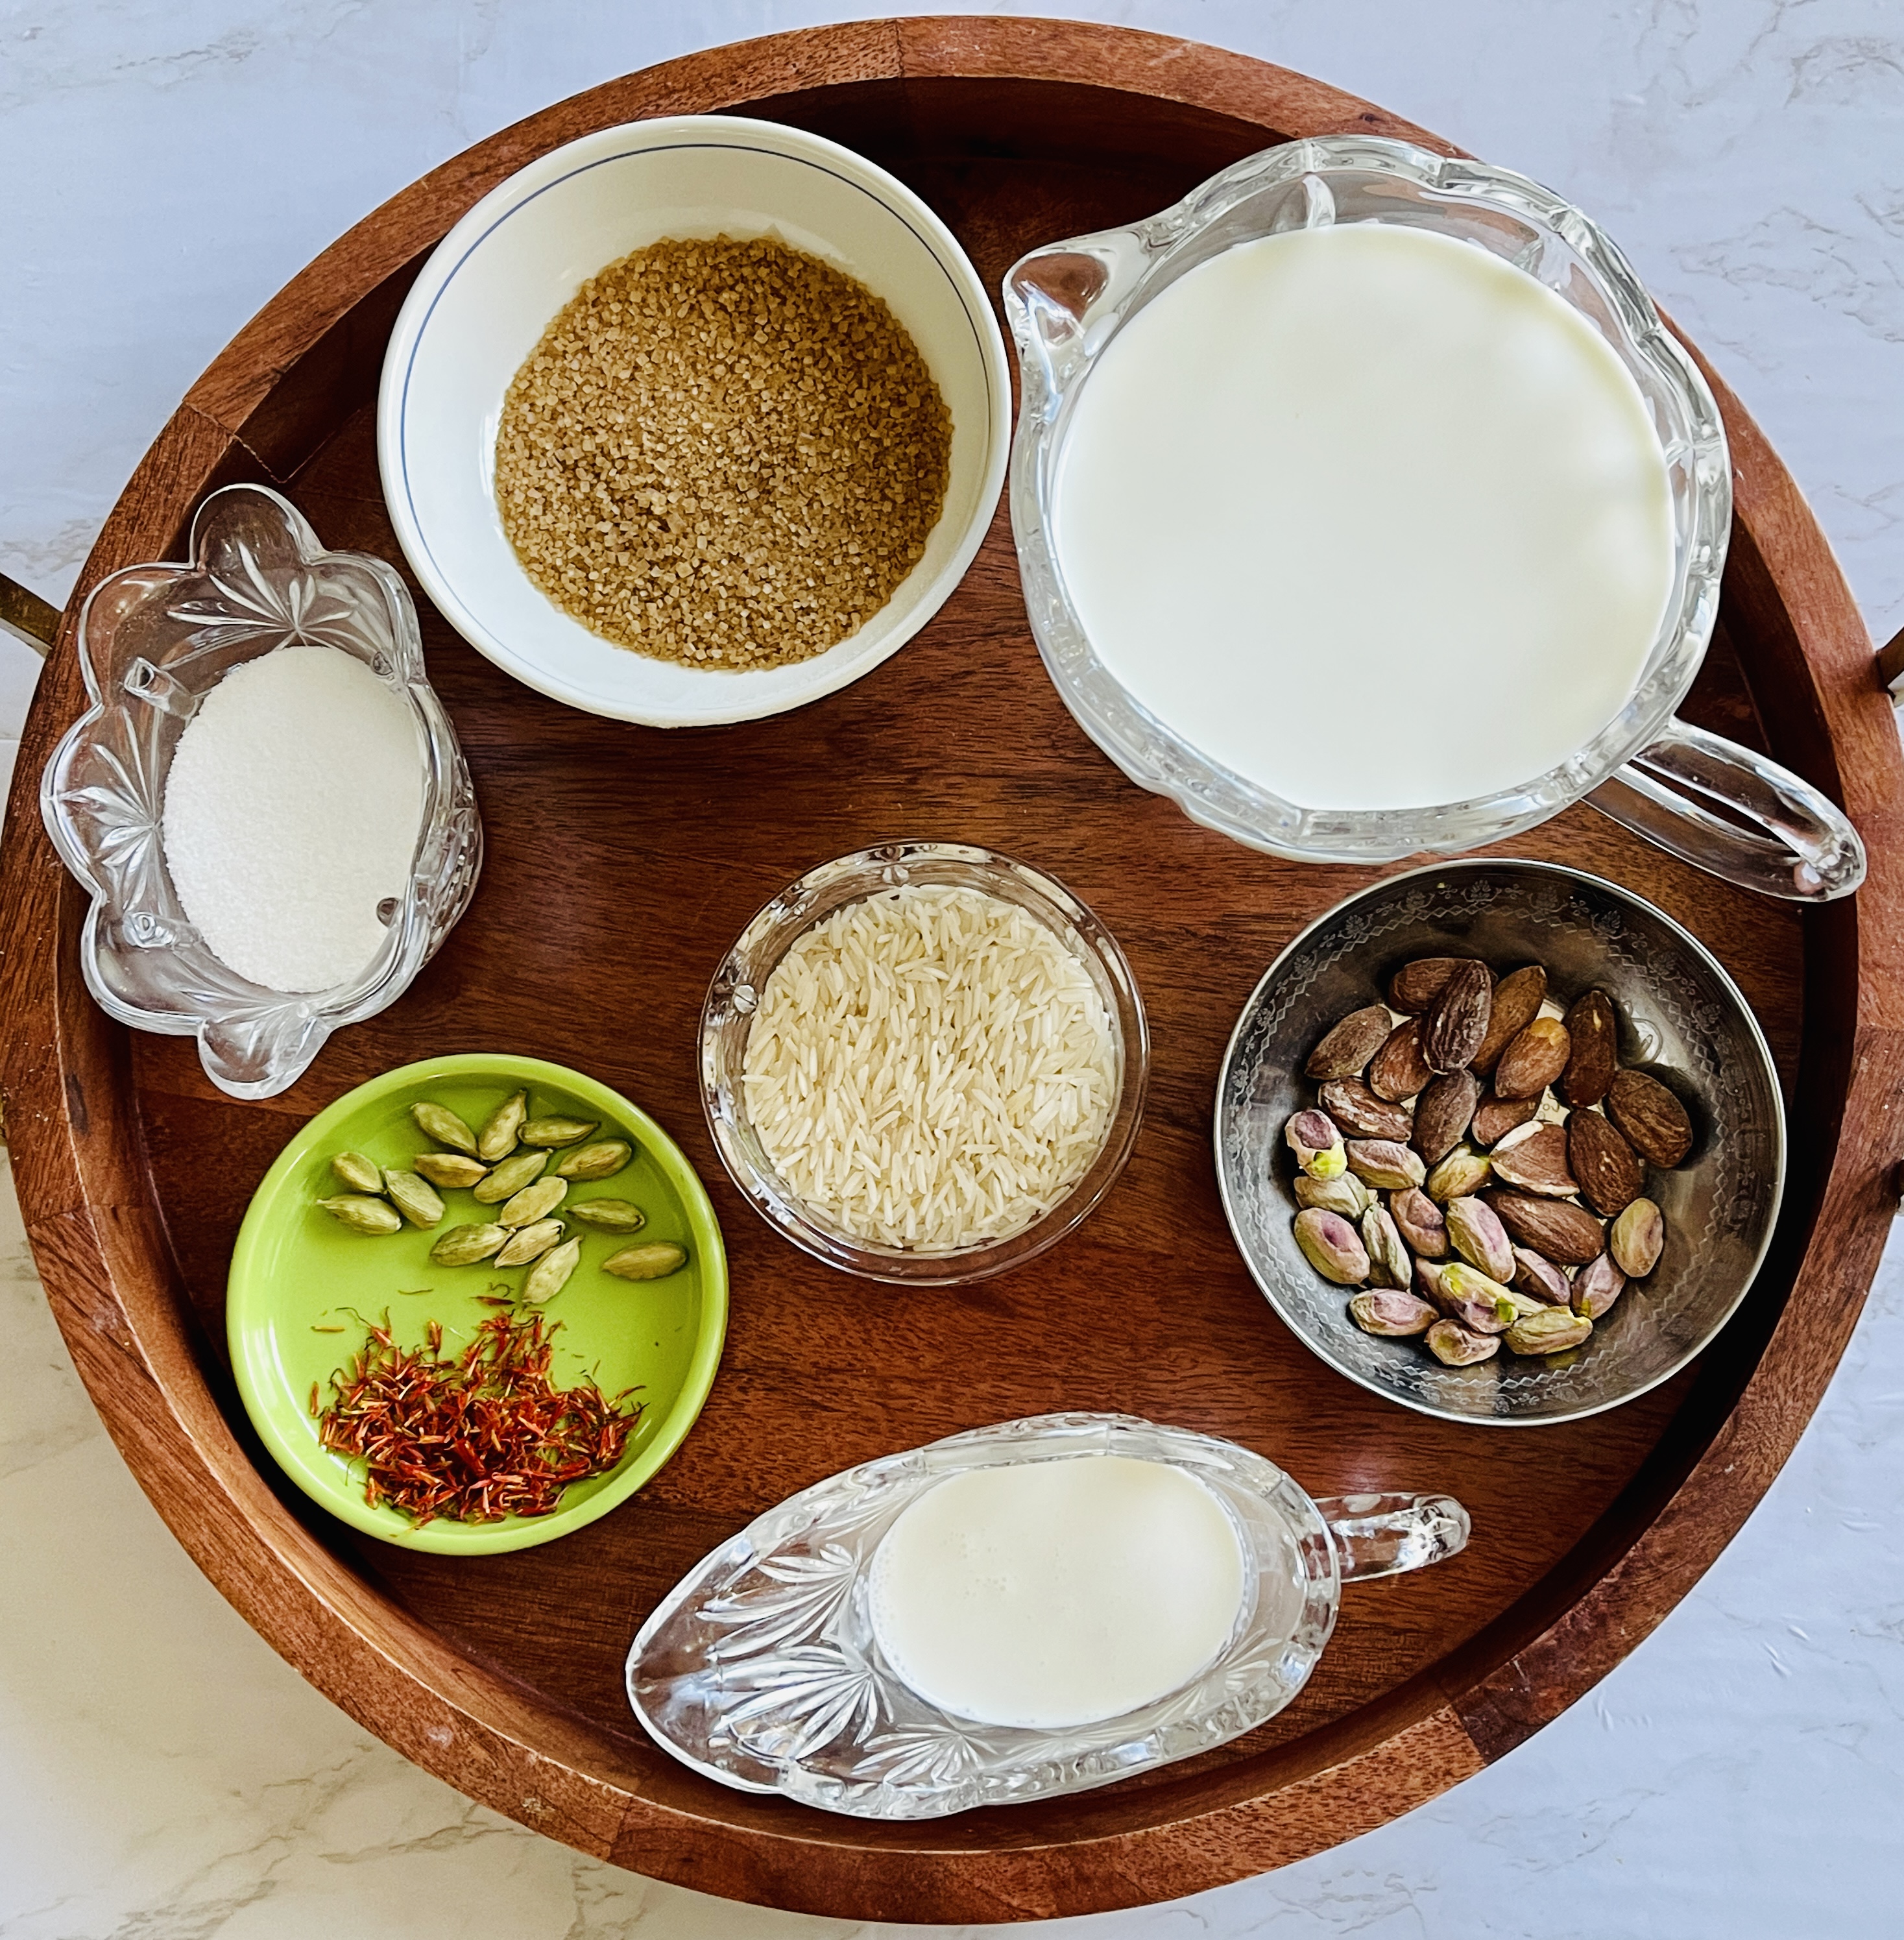 Ingredients for Kheer Recipe (rice pudding)